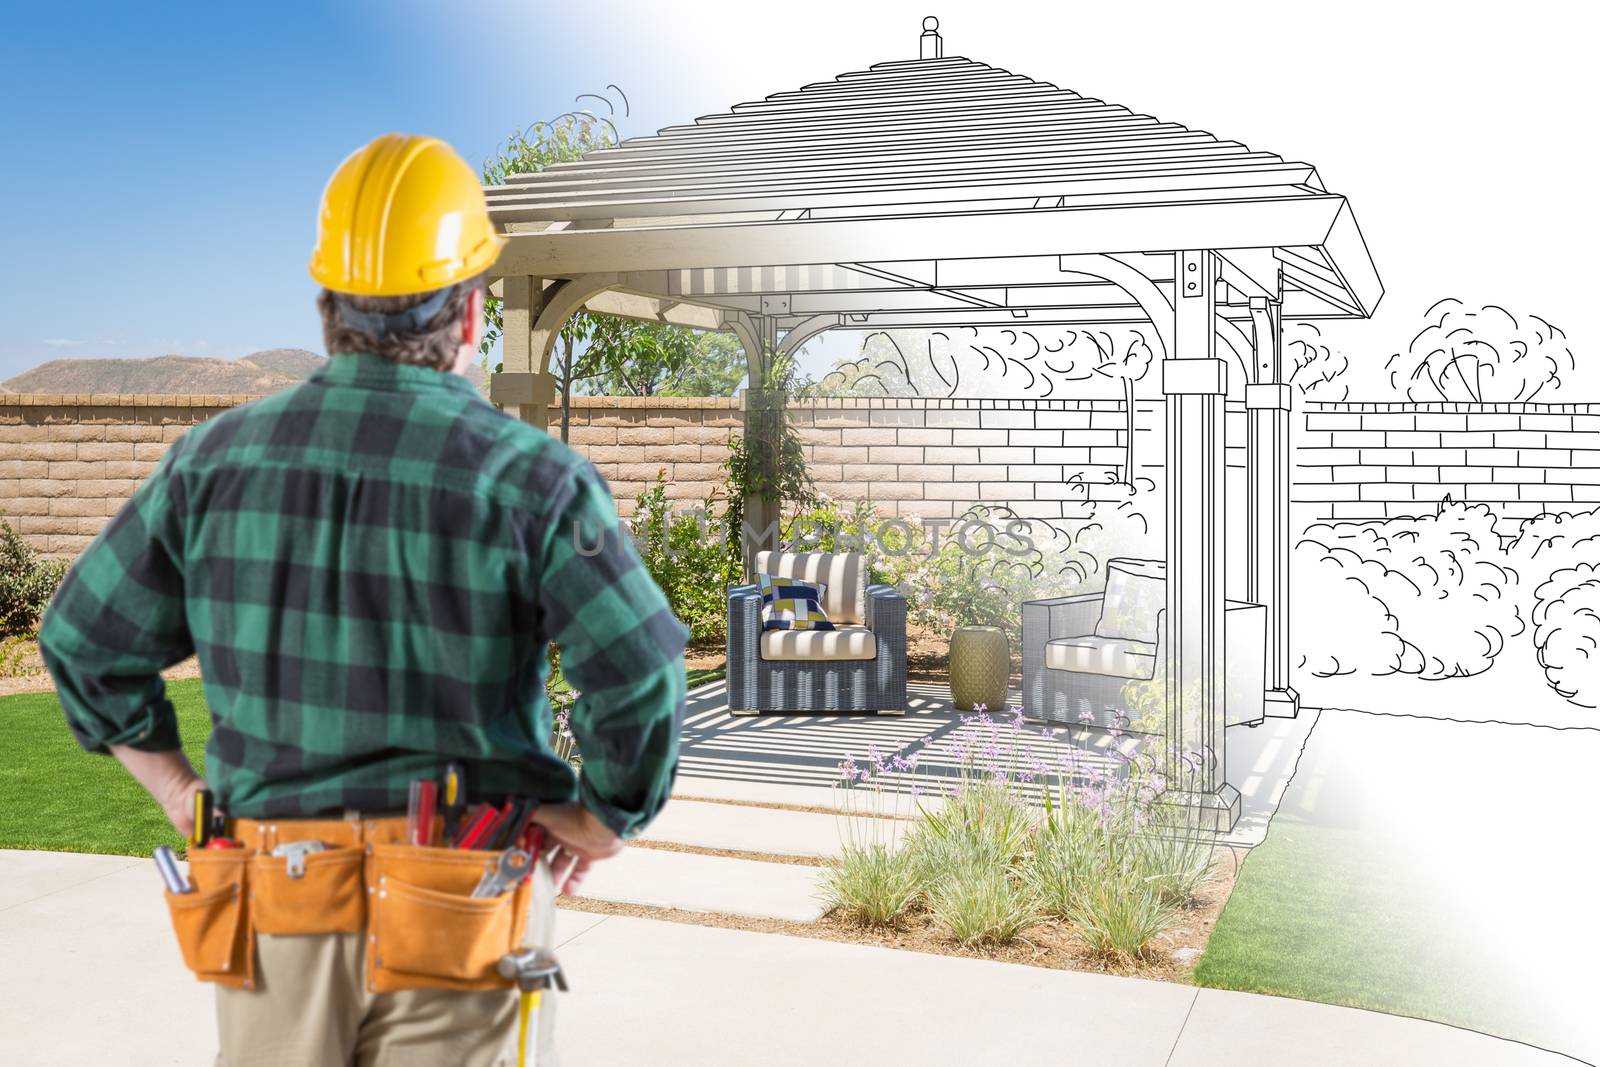 Contractor Standing Looking At Patio Pergola Design Drawing and Photo Combination.